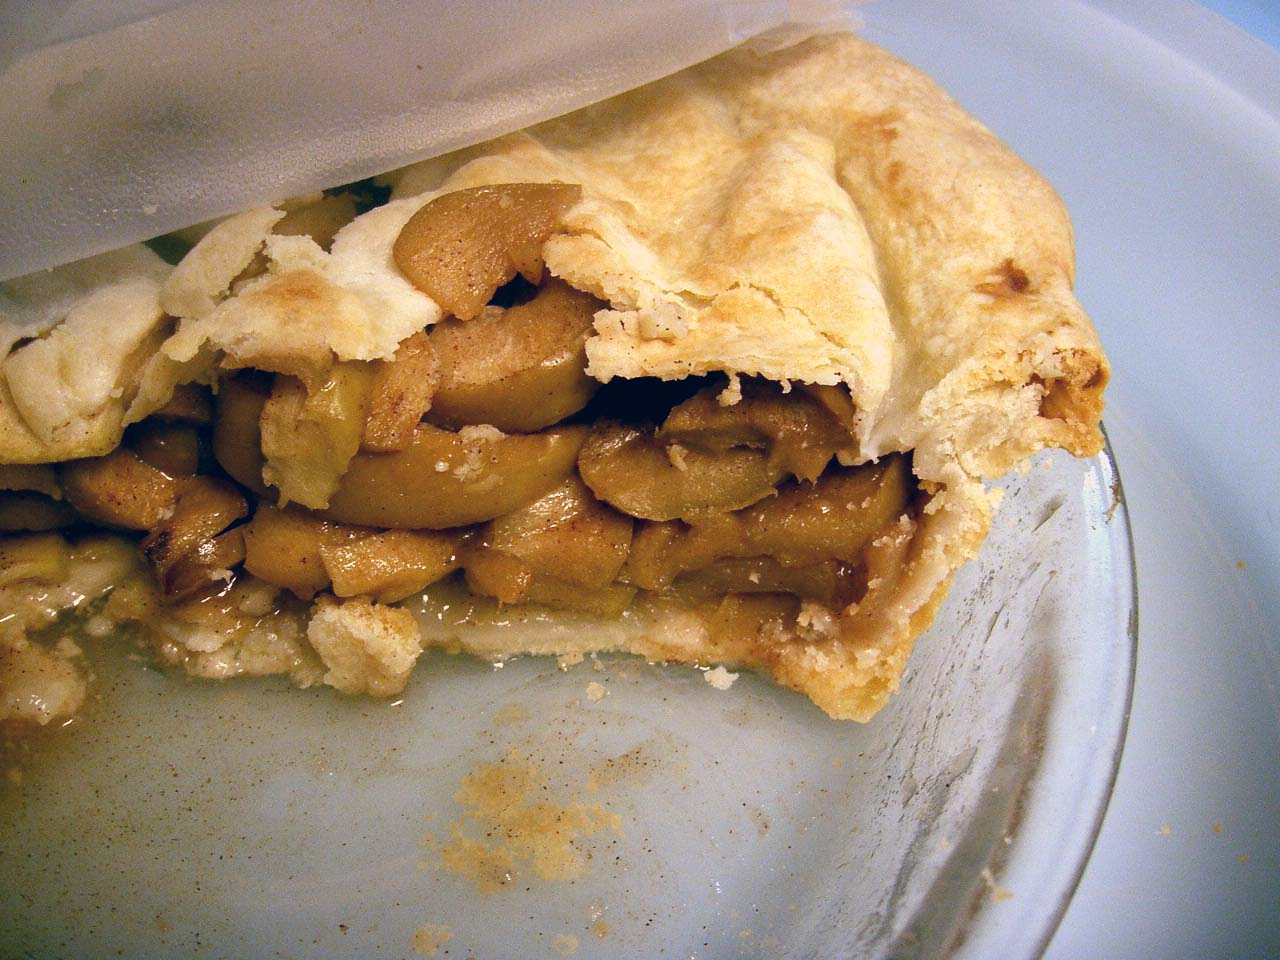 a partially eaten apple pie sitting on a plate